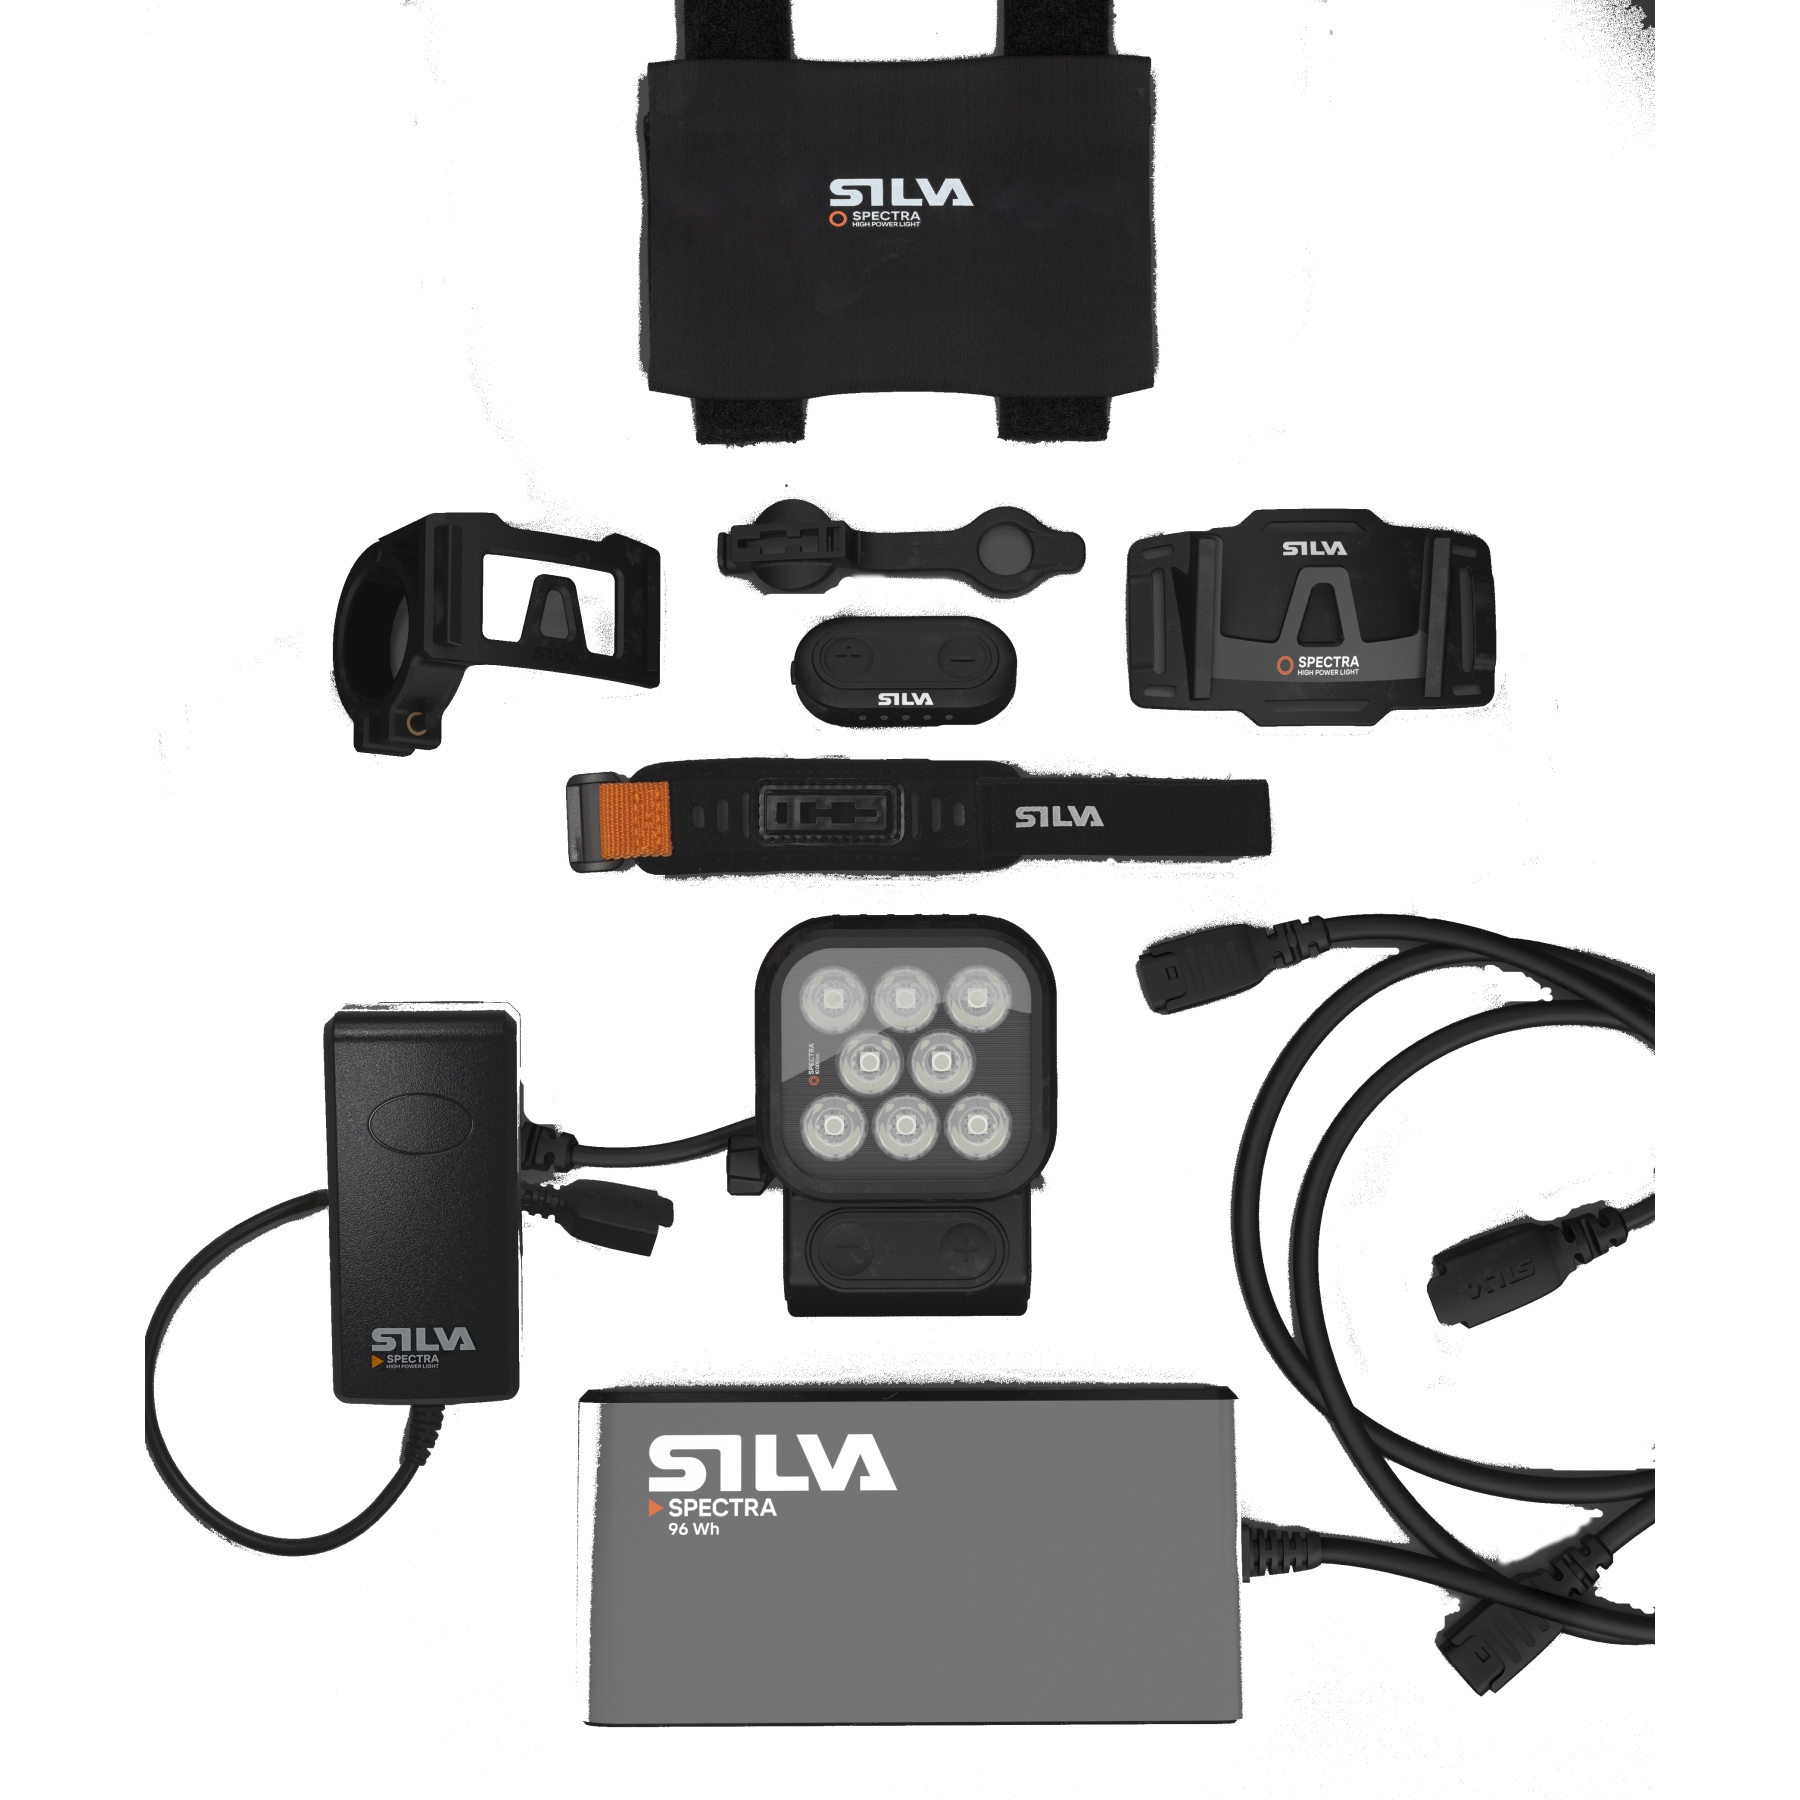 Picture of Silva Spectra A GER Headlamp - 10.000 lm